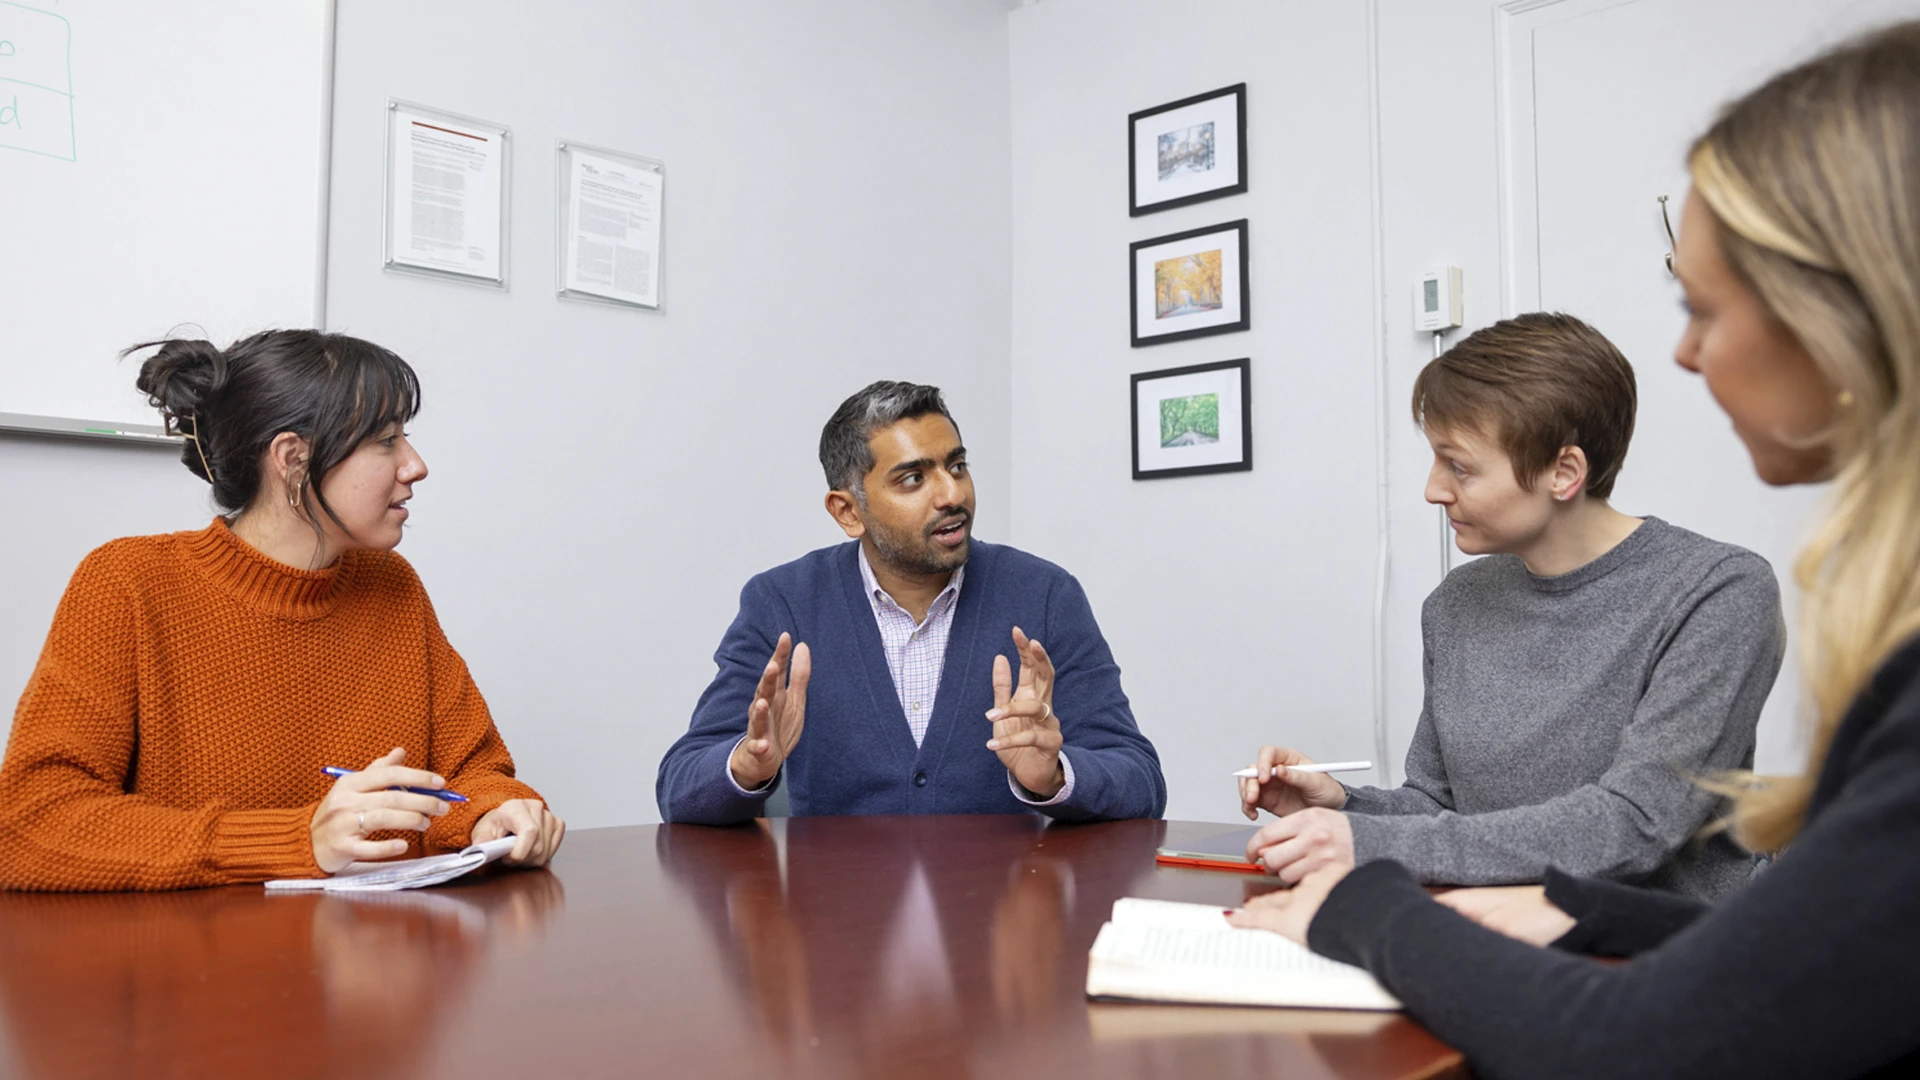 Dr. Kumar (second from left) with his research team, from left to right, clinical research coordinator Sydney McCage; program manager Amanda Watsula; and project manager Brittany Engelman. They are leveraging the Mount Sinai Data Warehouse that aggregates clinical data across the Health System.